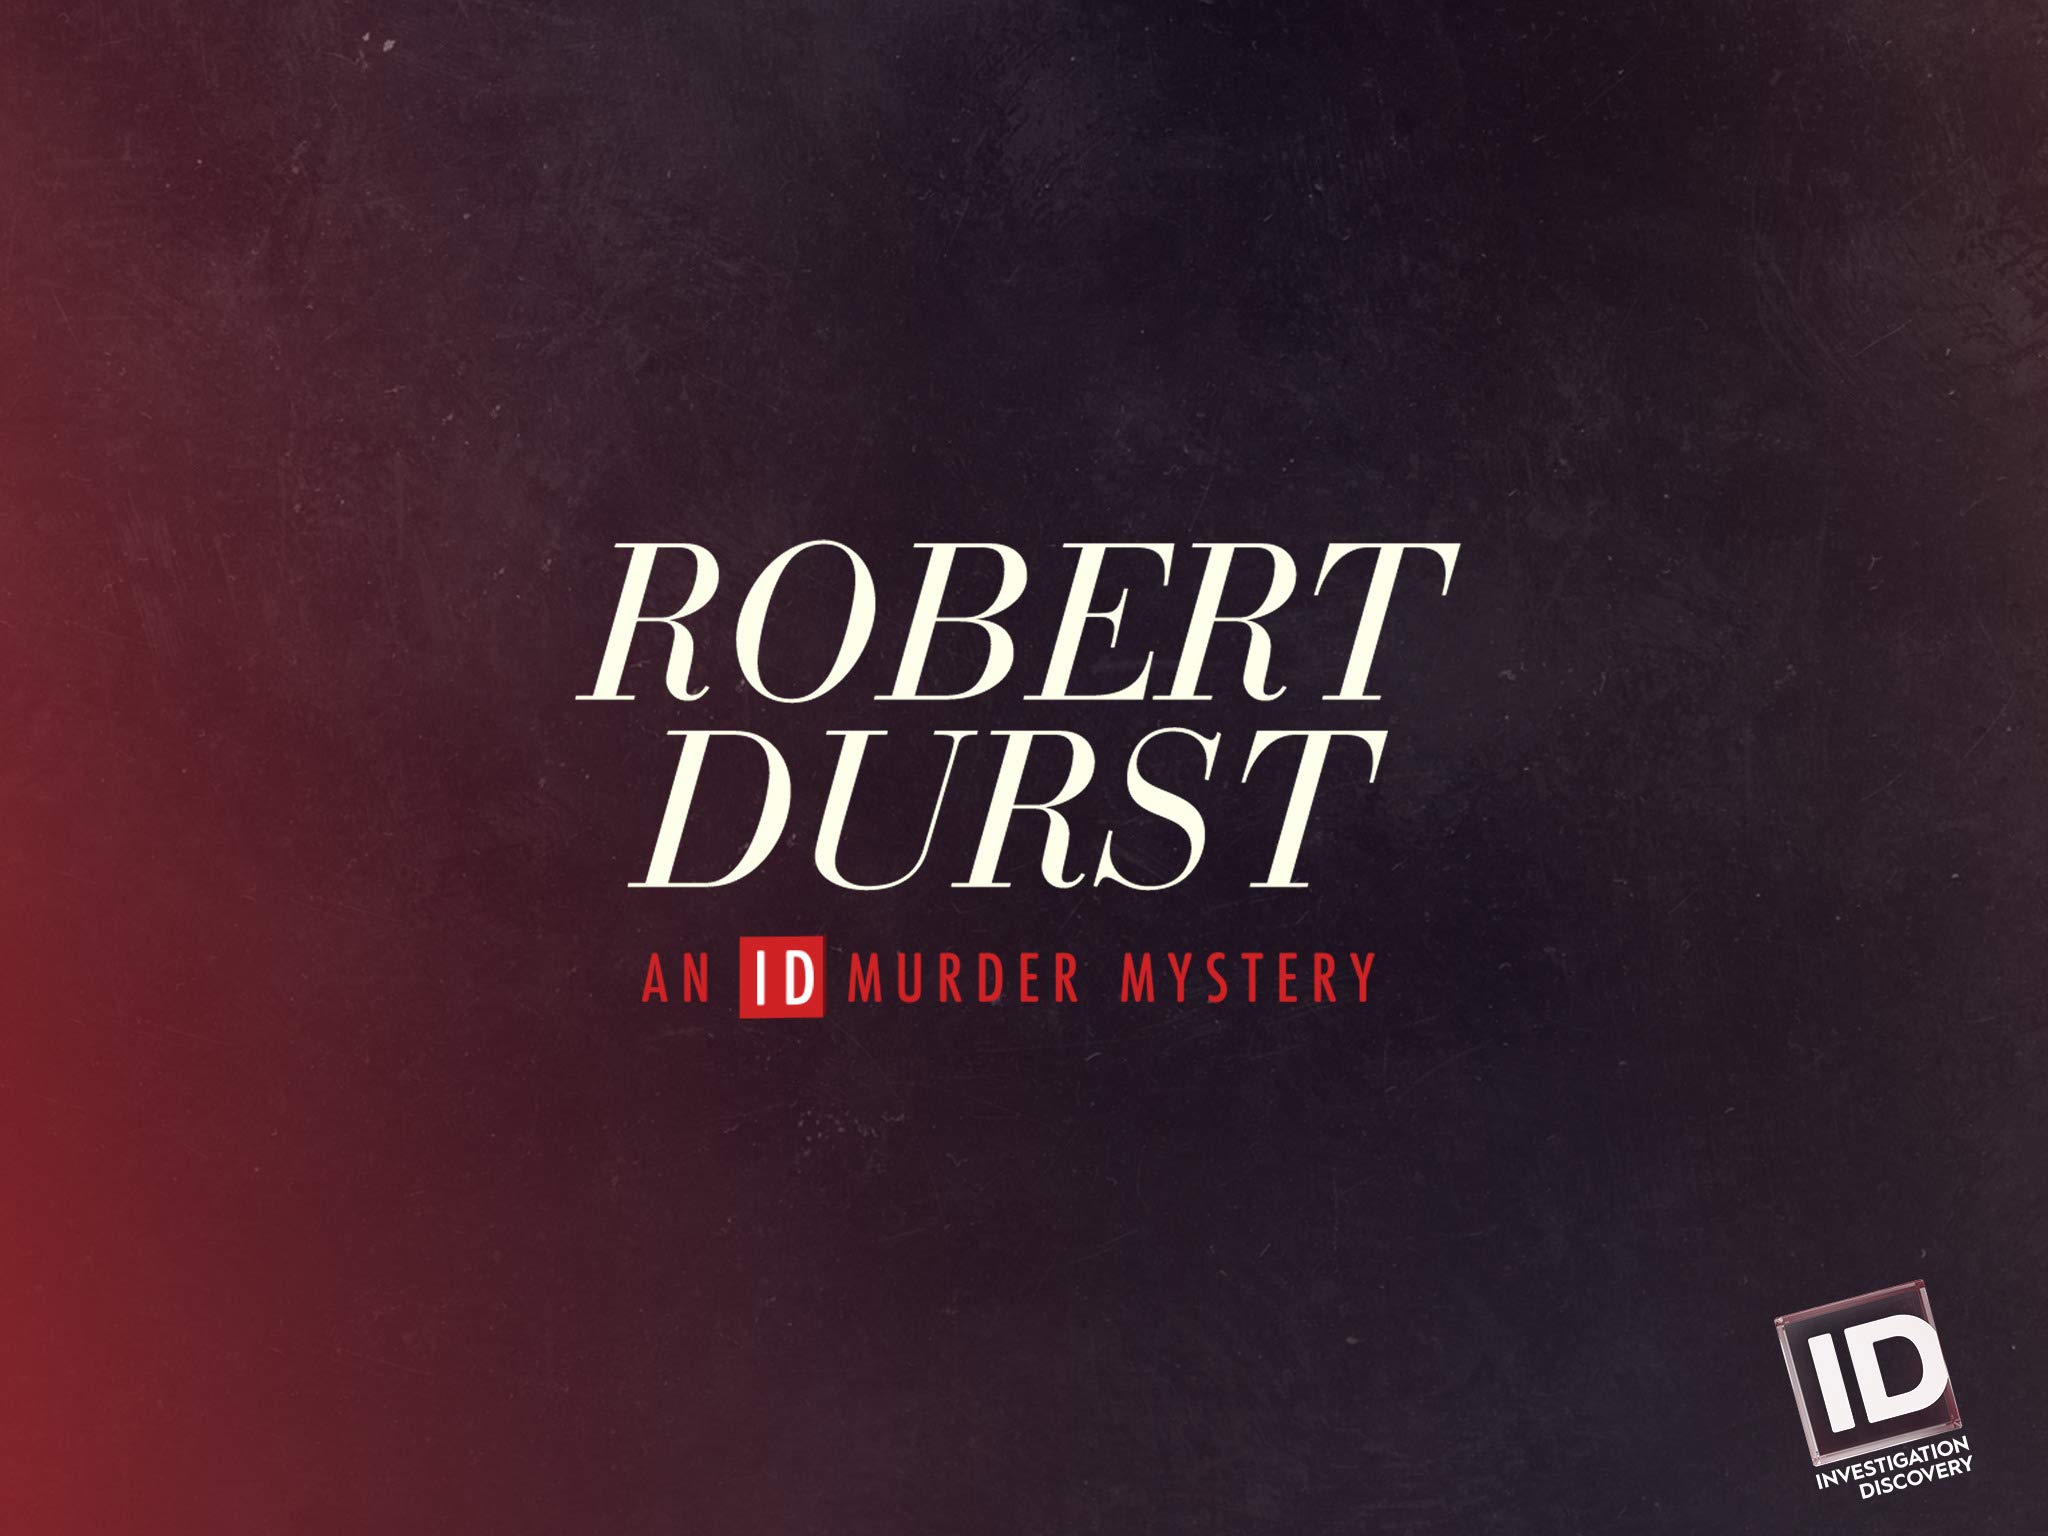 TV ratings for Robert Durst: An Id Murder Mystery in Japón. investigation discovery TV series